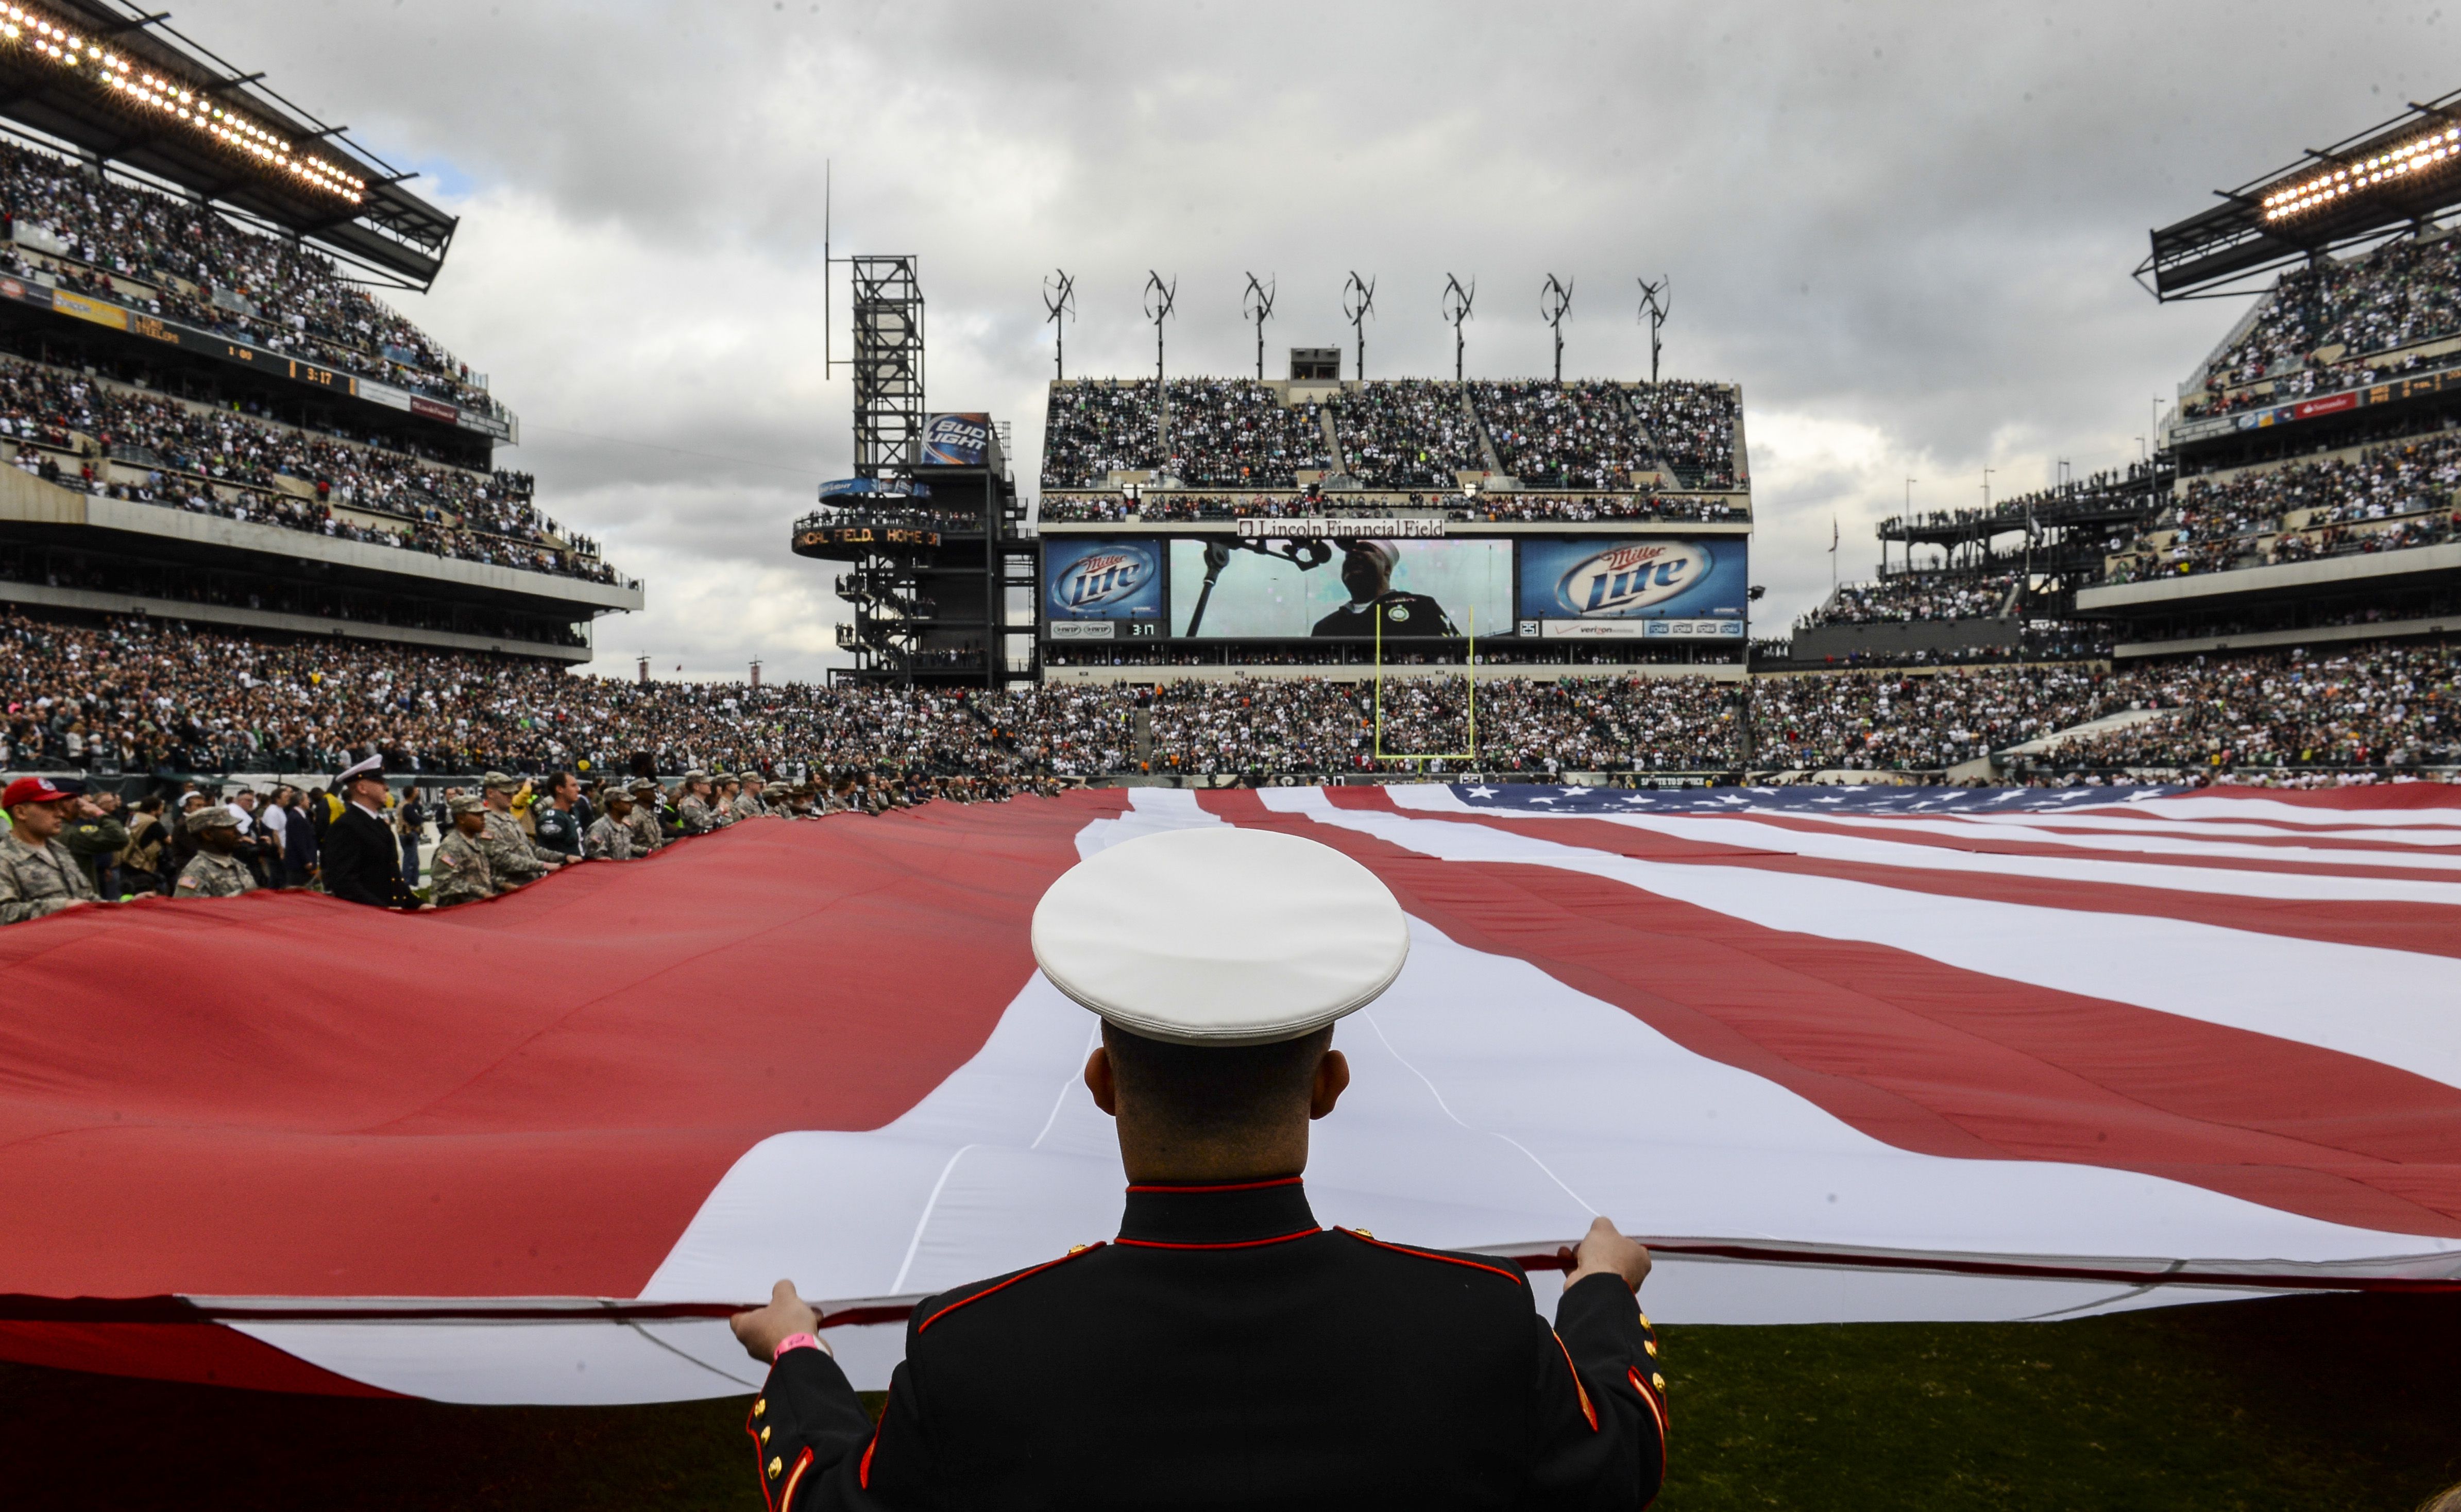 For decades, the NFL wrapped itself in the flag. Now, that's made business  uneasy. - The Washington Post